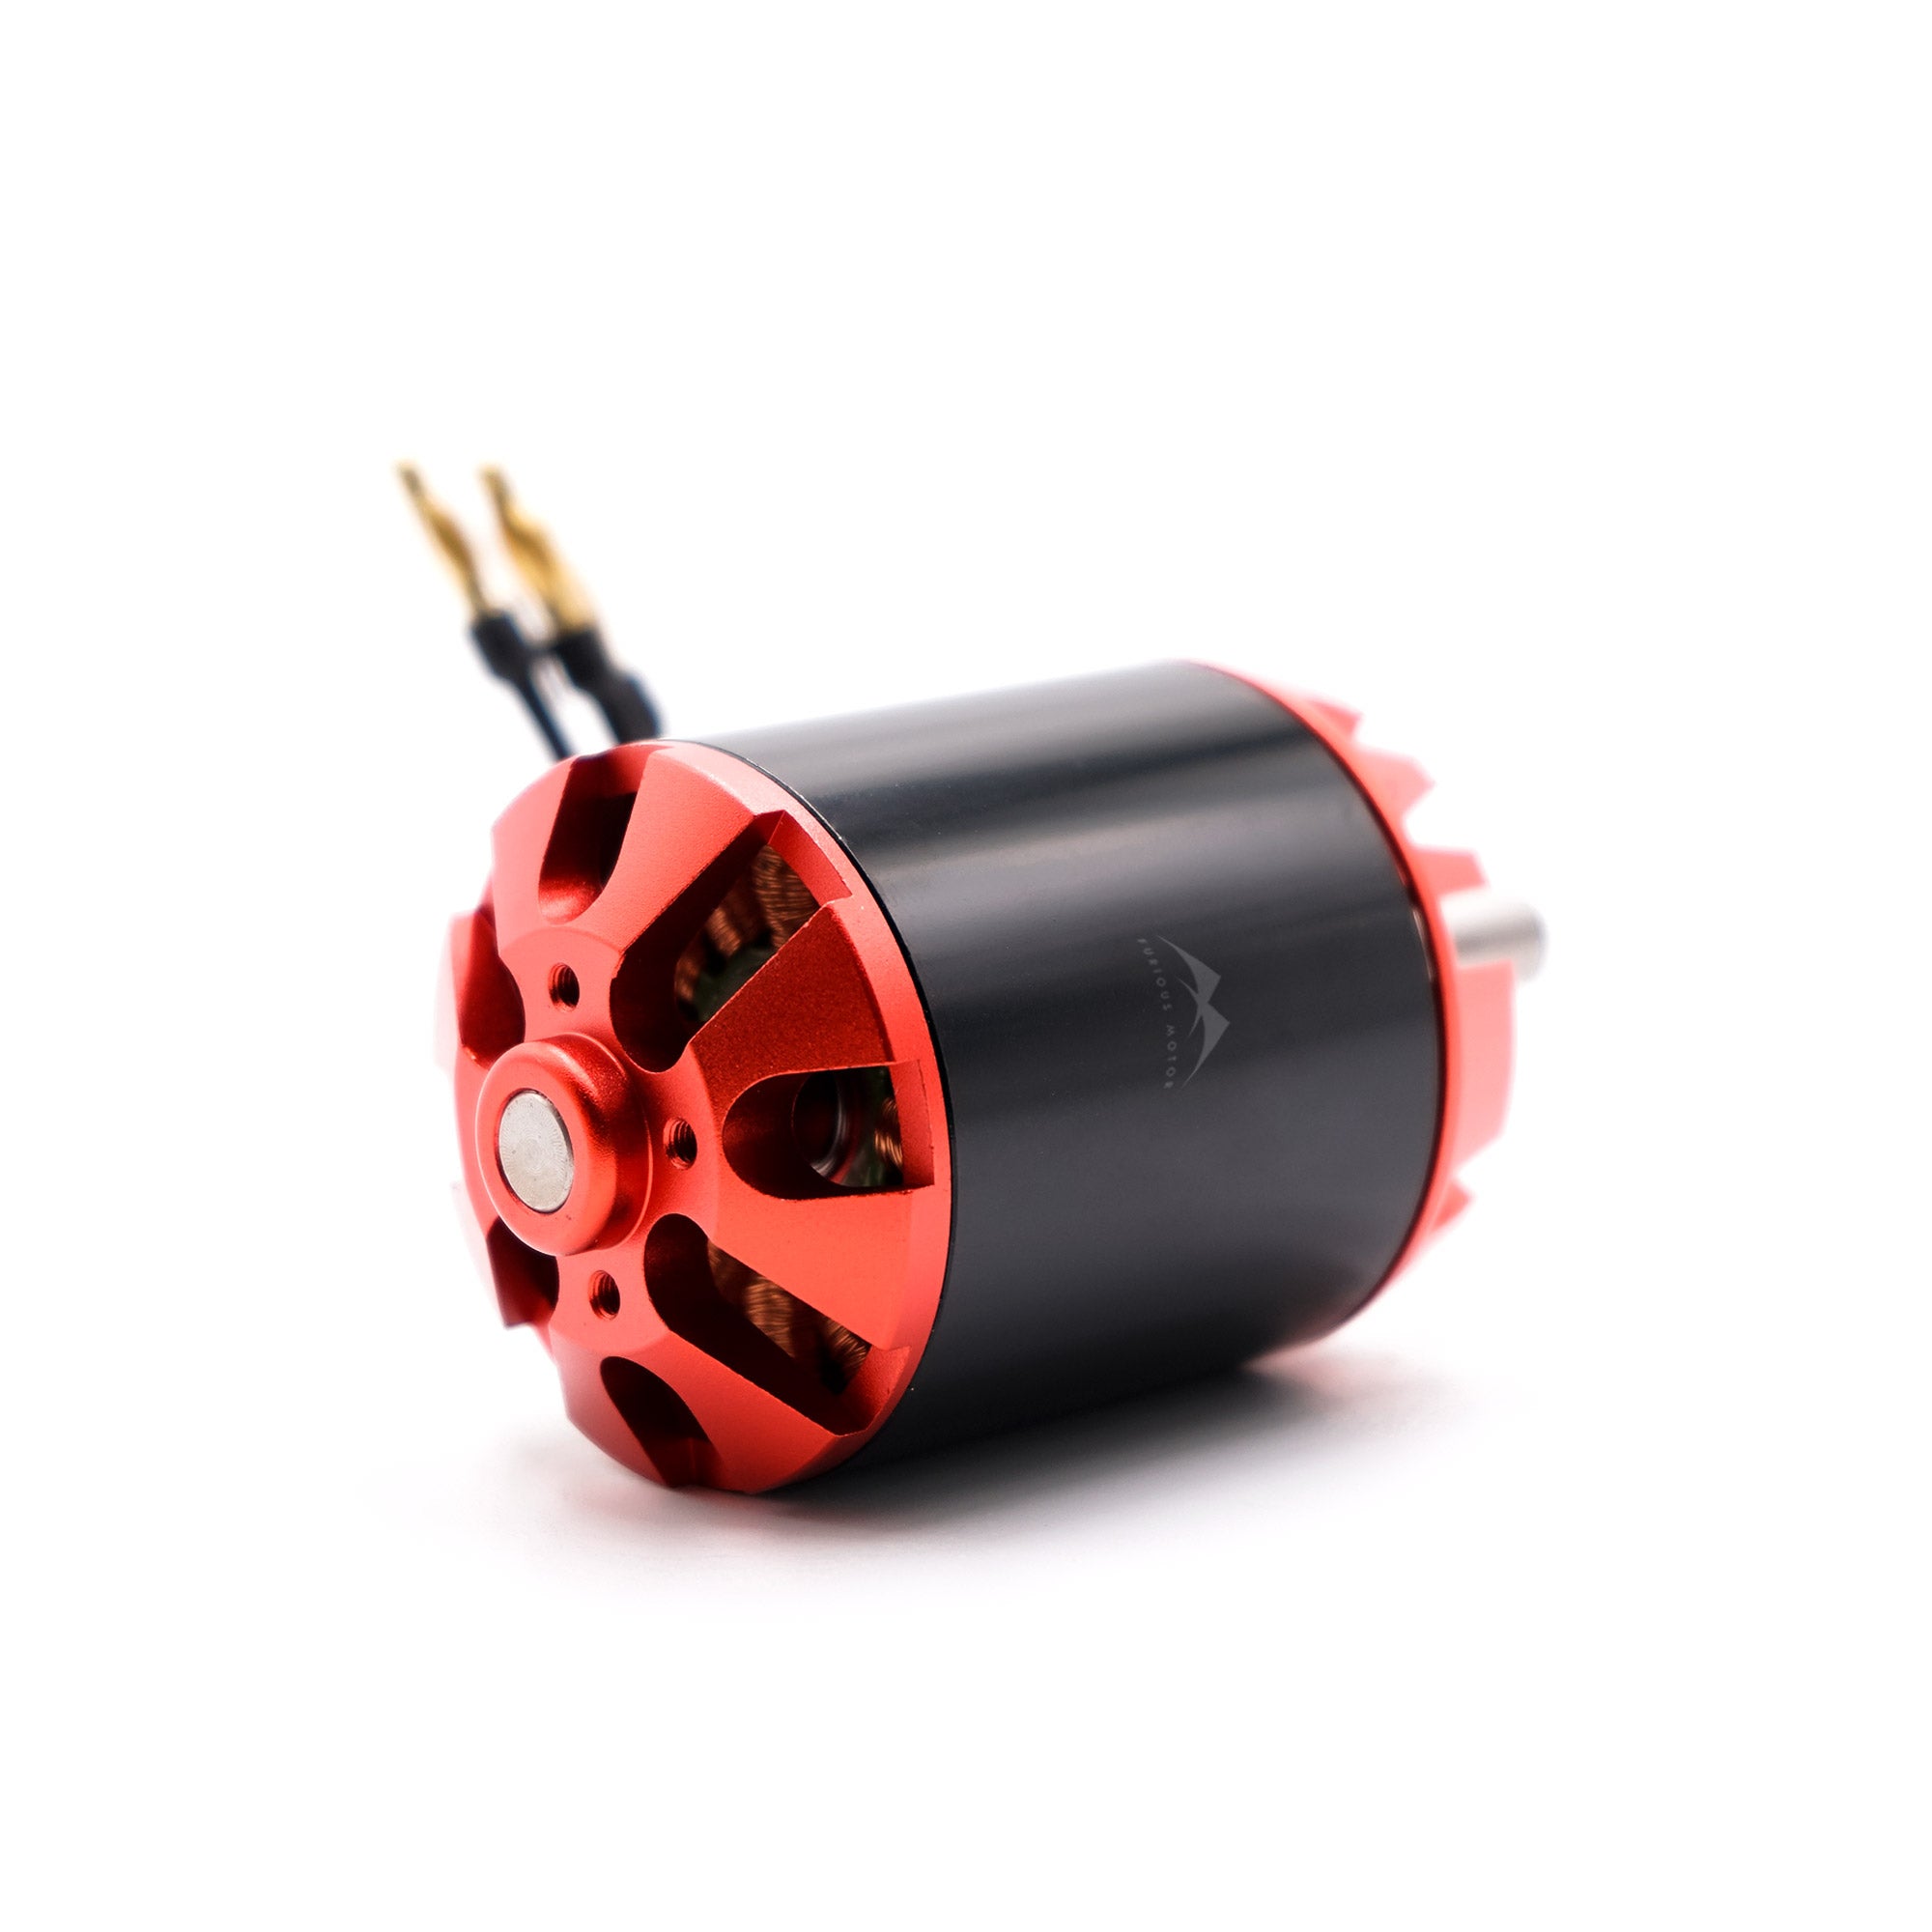 5065 Ultralight Aircraft Engine Brushless Motor Multi Rotor Drone Aeromodel and Electric Tool